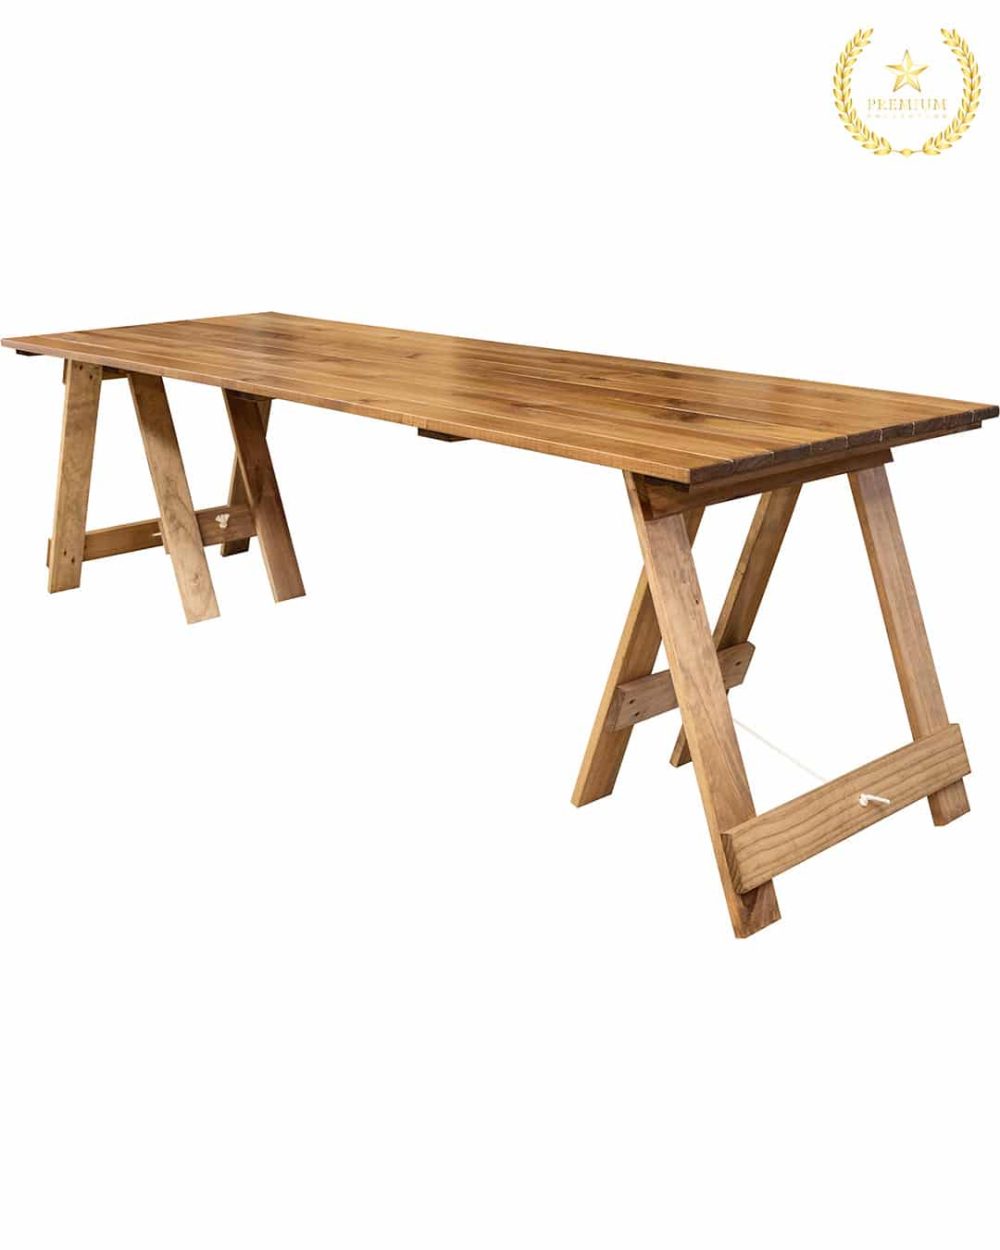 2.4 Stained Trestle Table